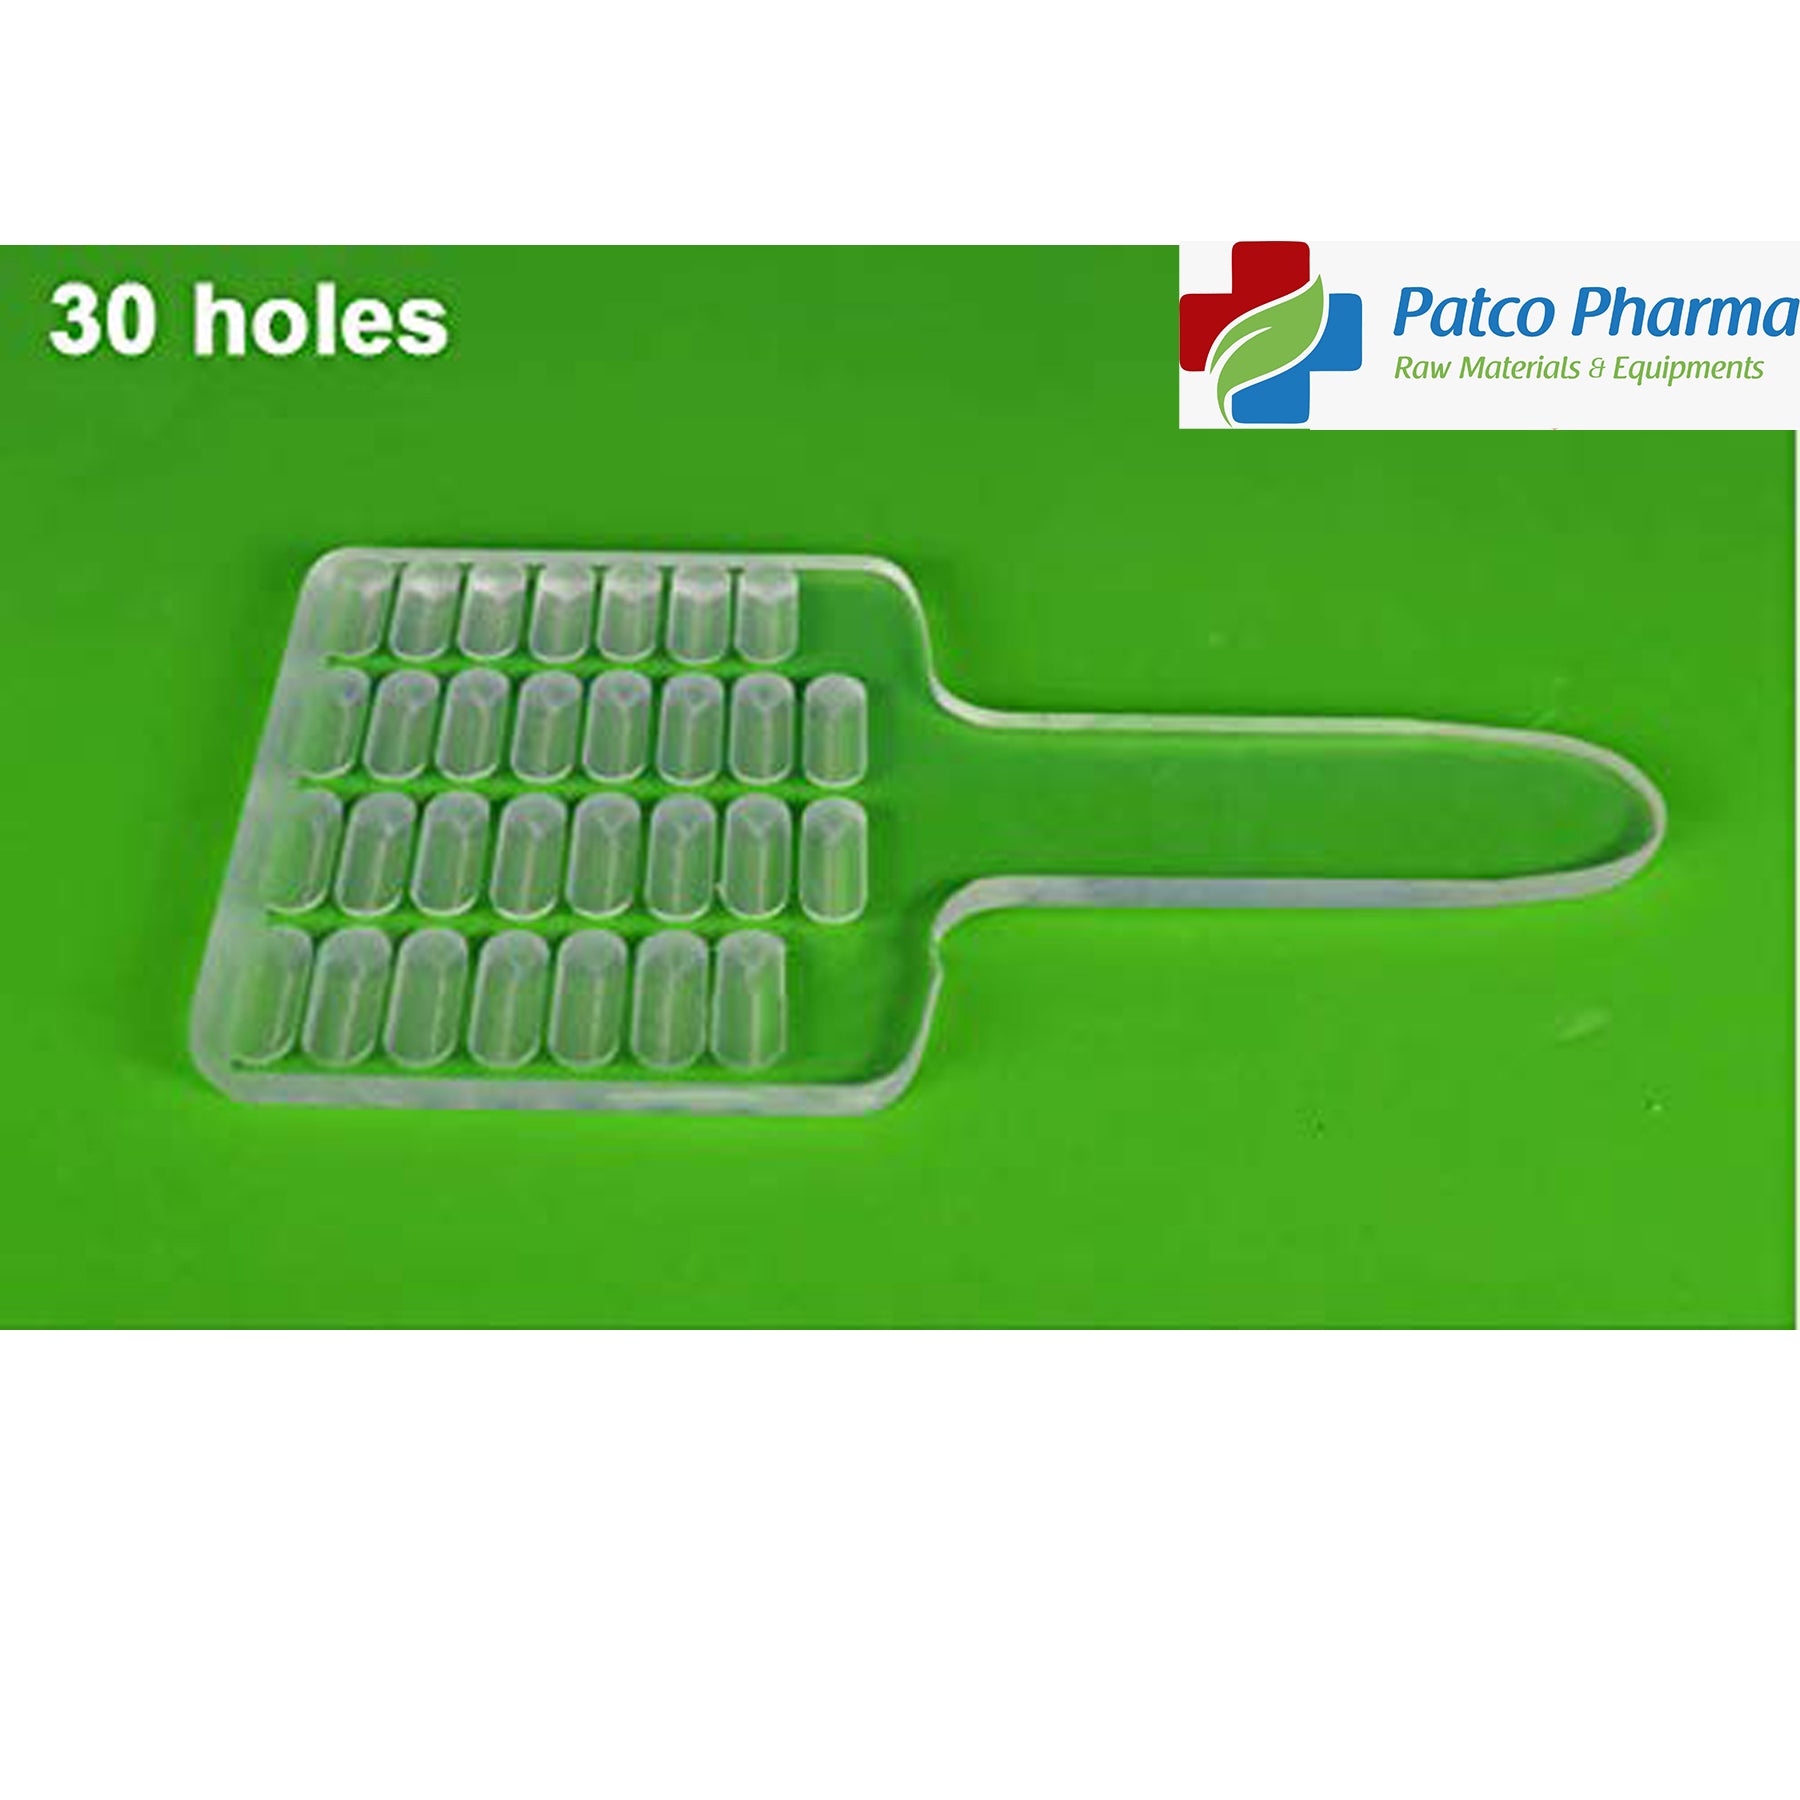 Manual Capsule Counter Count Board/Tray For Size 0 (30 Holes Capsule Counter), Patco Pharma, Capsule Filling Machines & Tools, manual-capsule-counter-count-board-tray-for-size-0-30-holes-capsule-counter, 30 holes, capsule couner, size 0 capsule, Patco Pharma